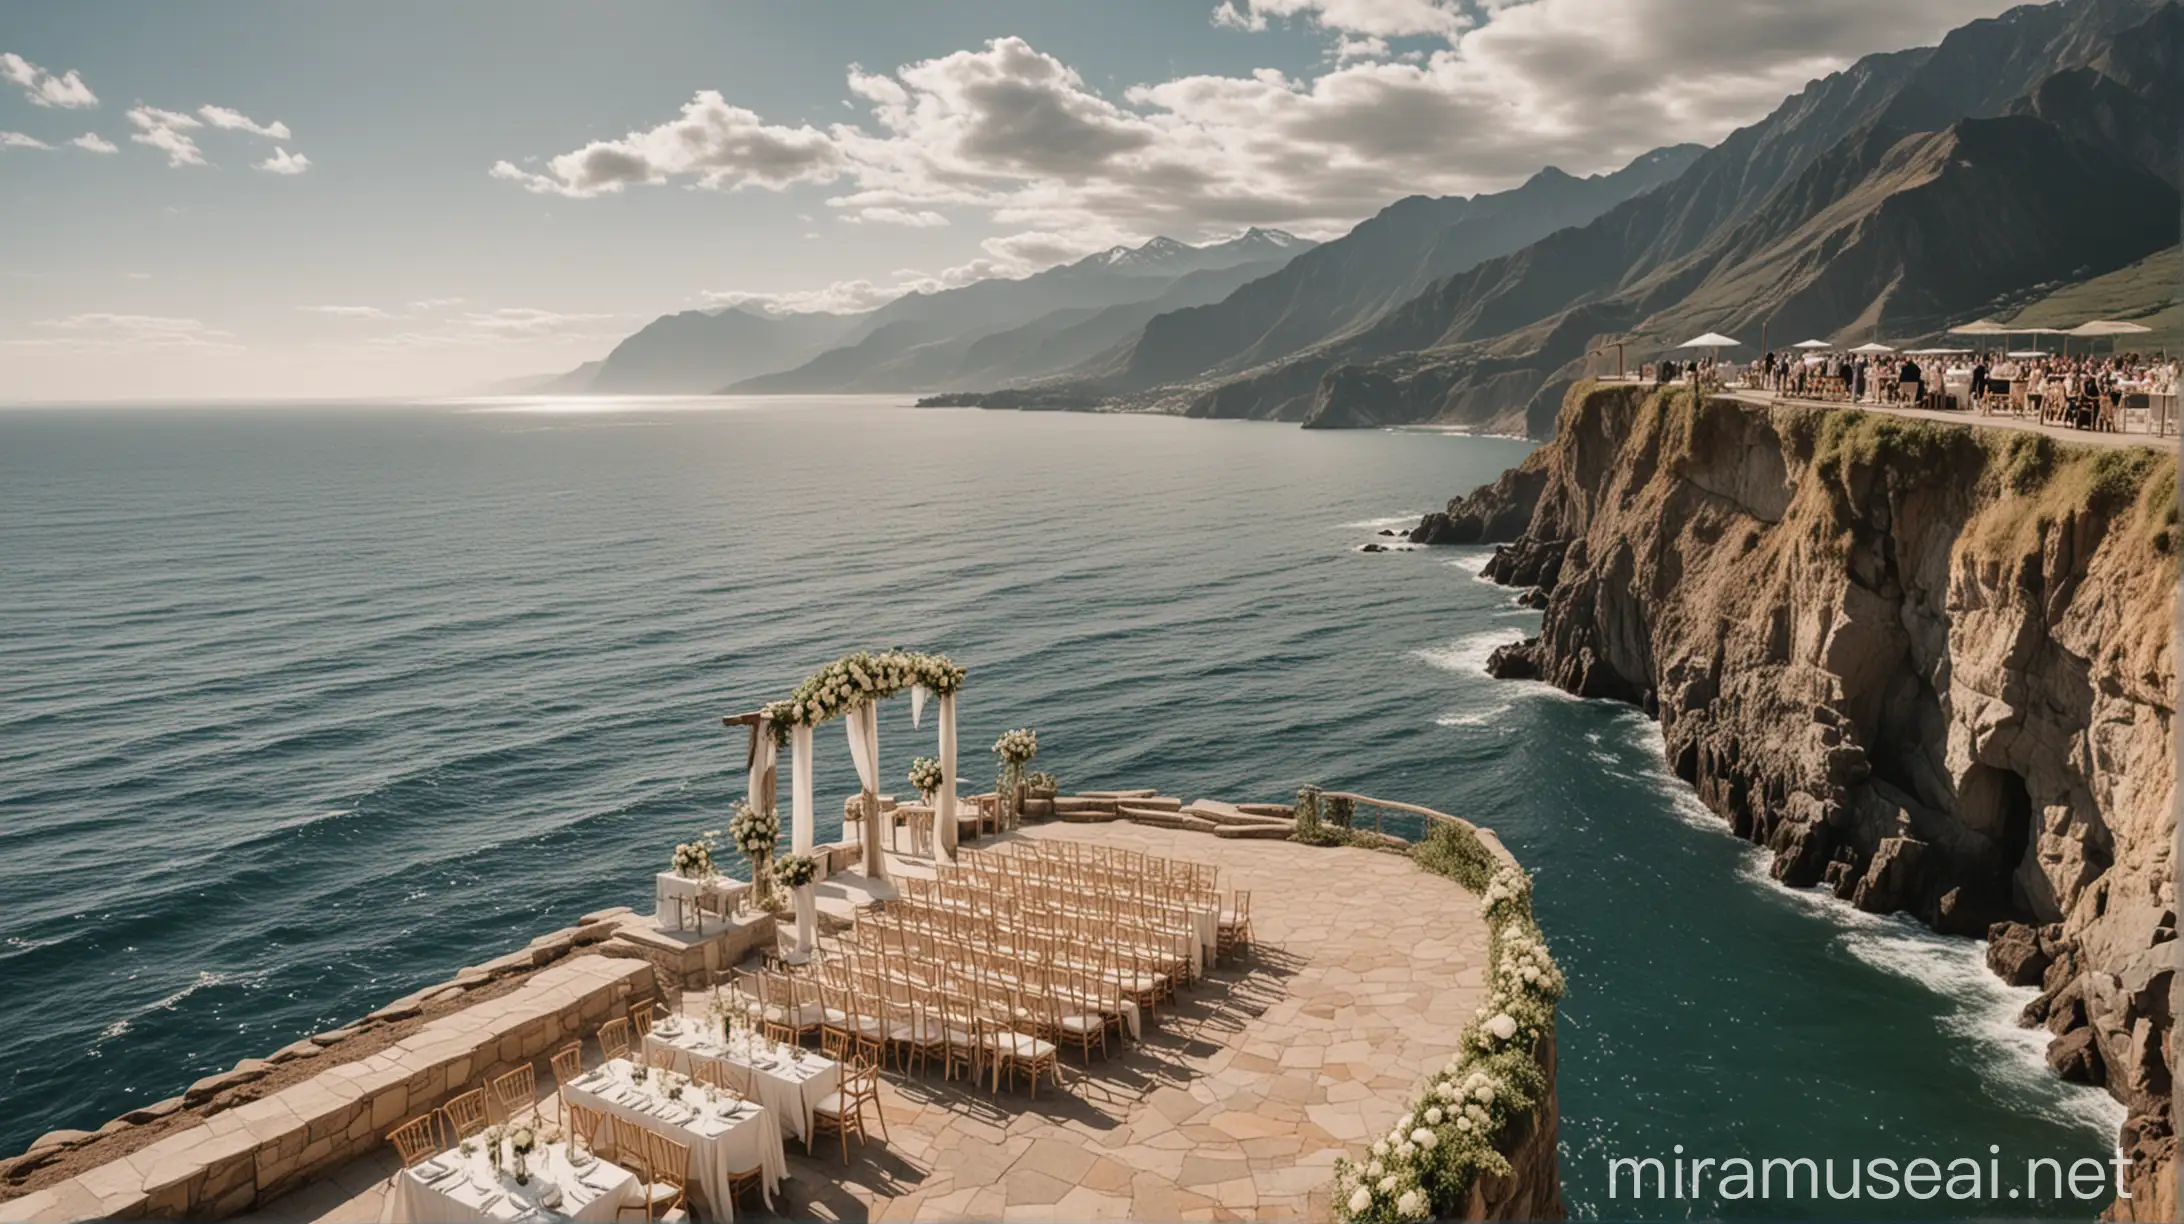 beautiful wedding venue on a cliff next to an ocean and breathtaking mountains in the background 